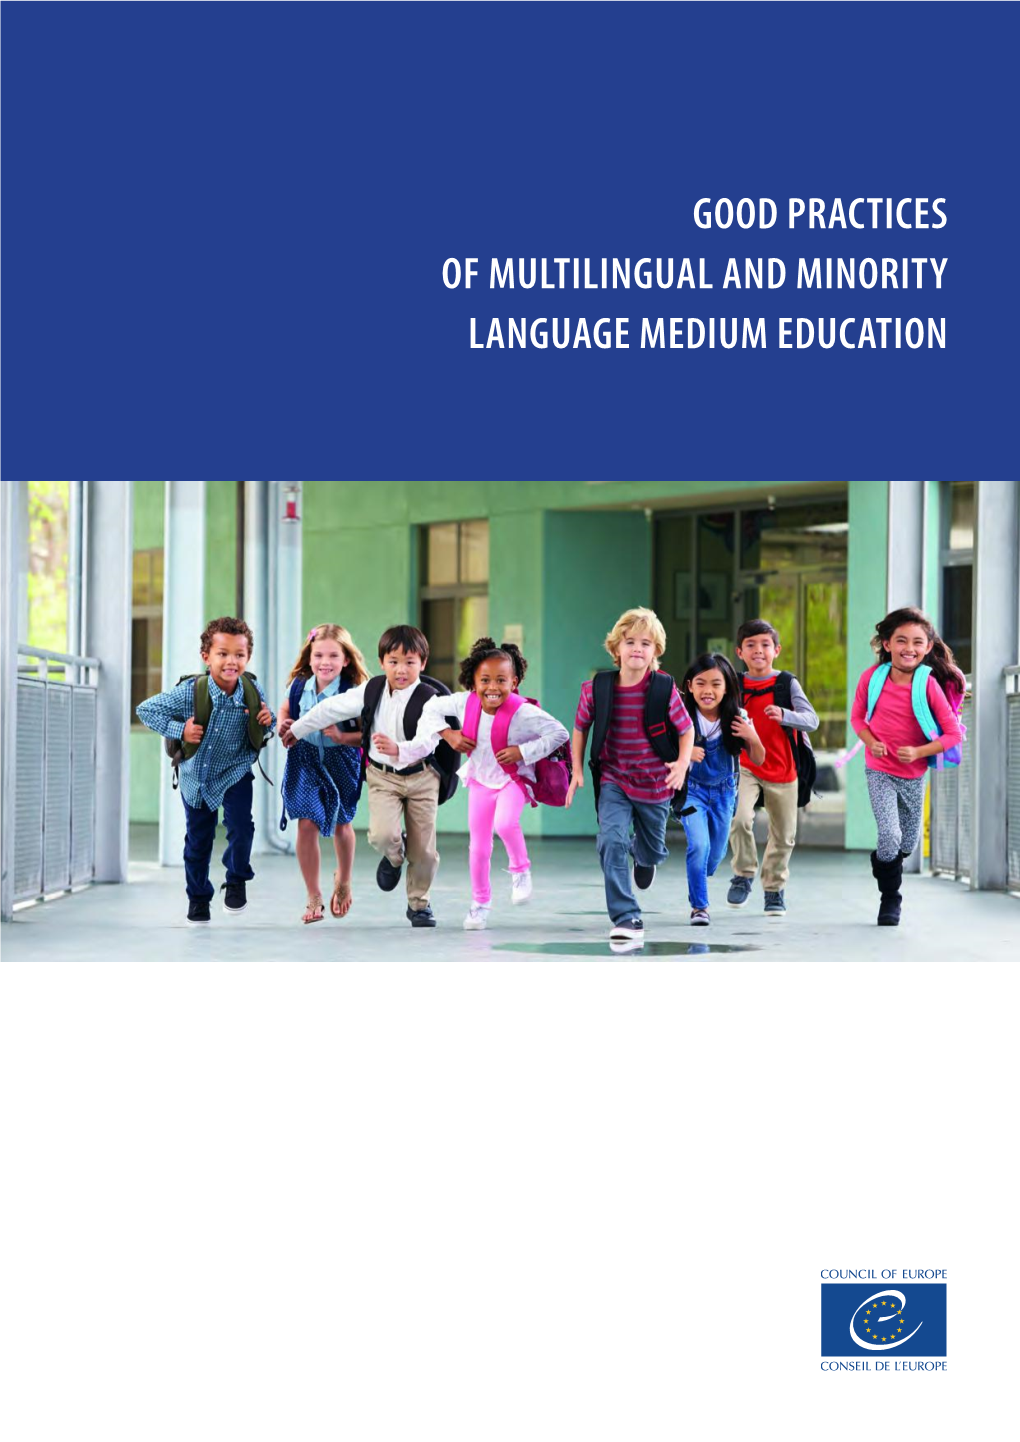 Good Practices of Multilingual and Minority Language Education